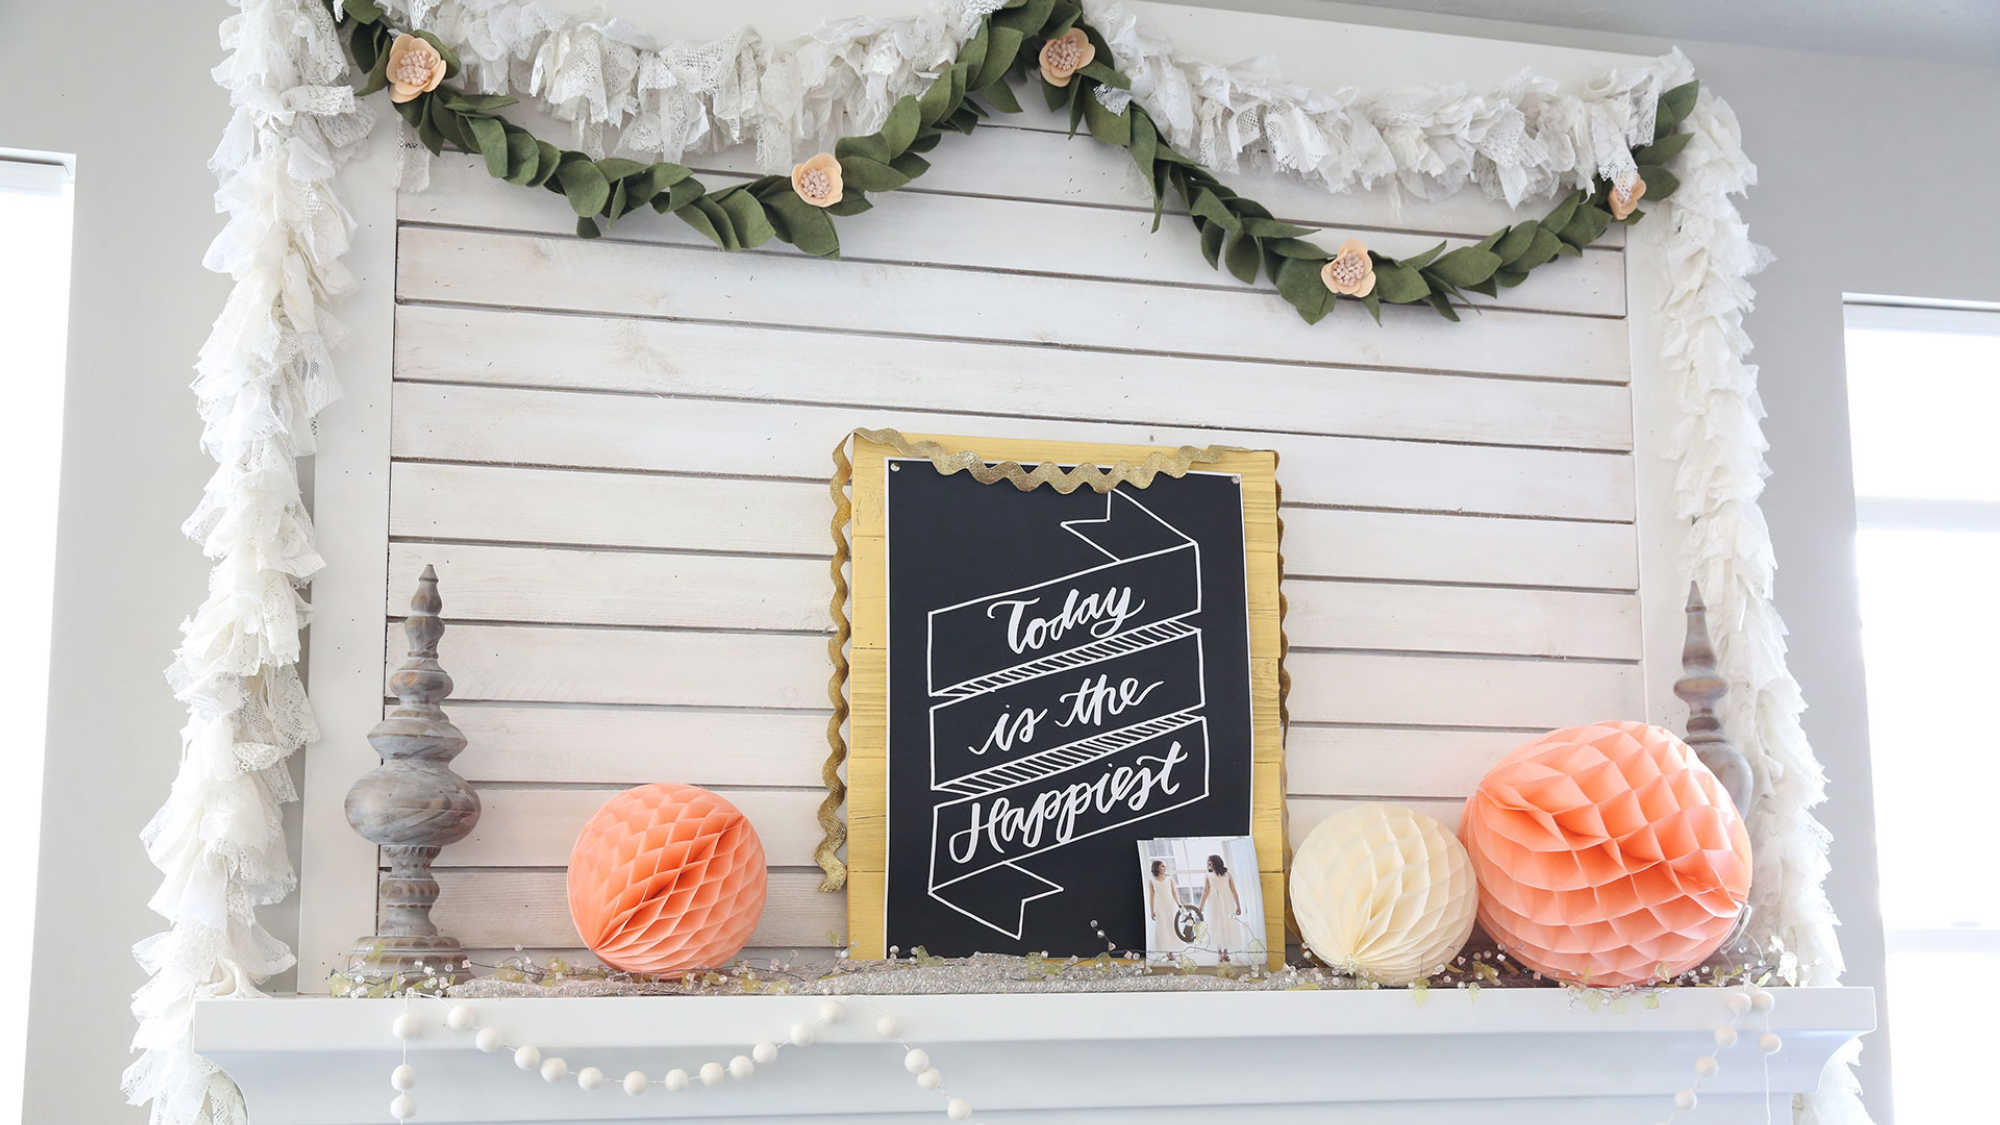 A homemade lace garland used in home decor.